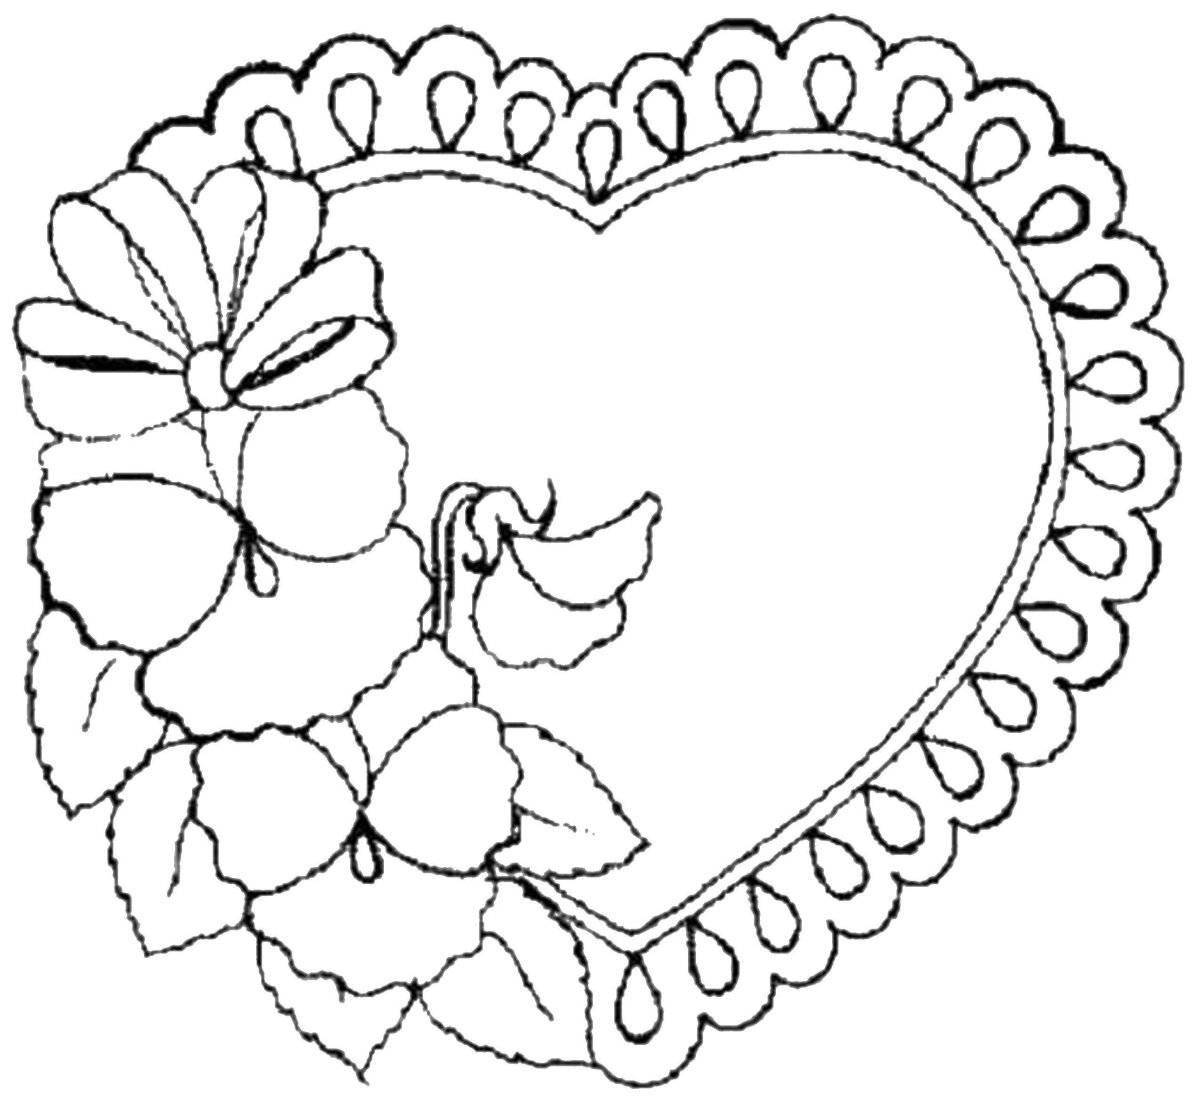 Charming valentine's coloring book